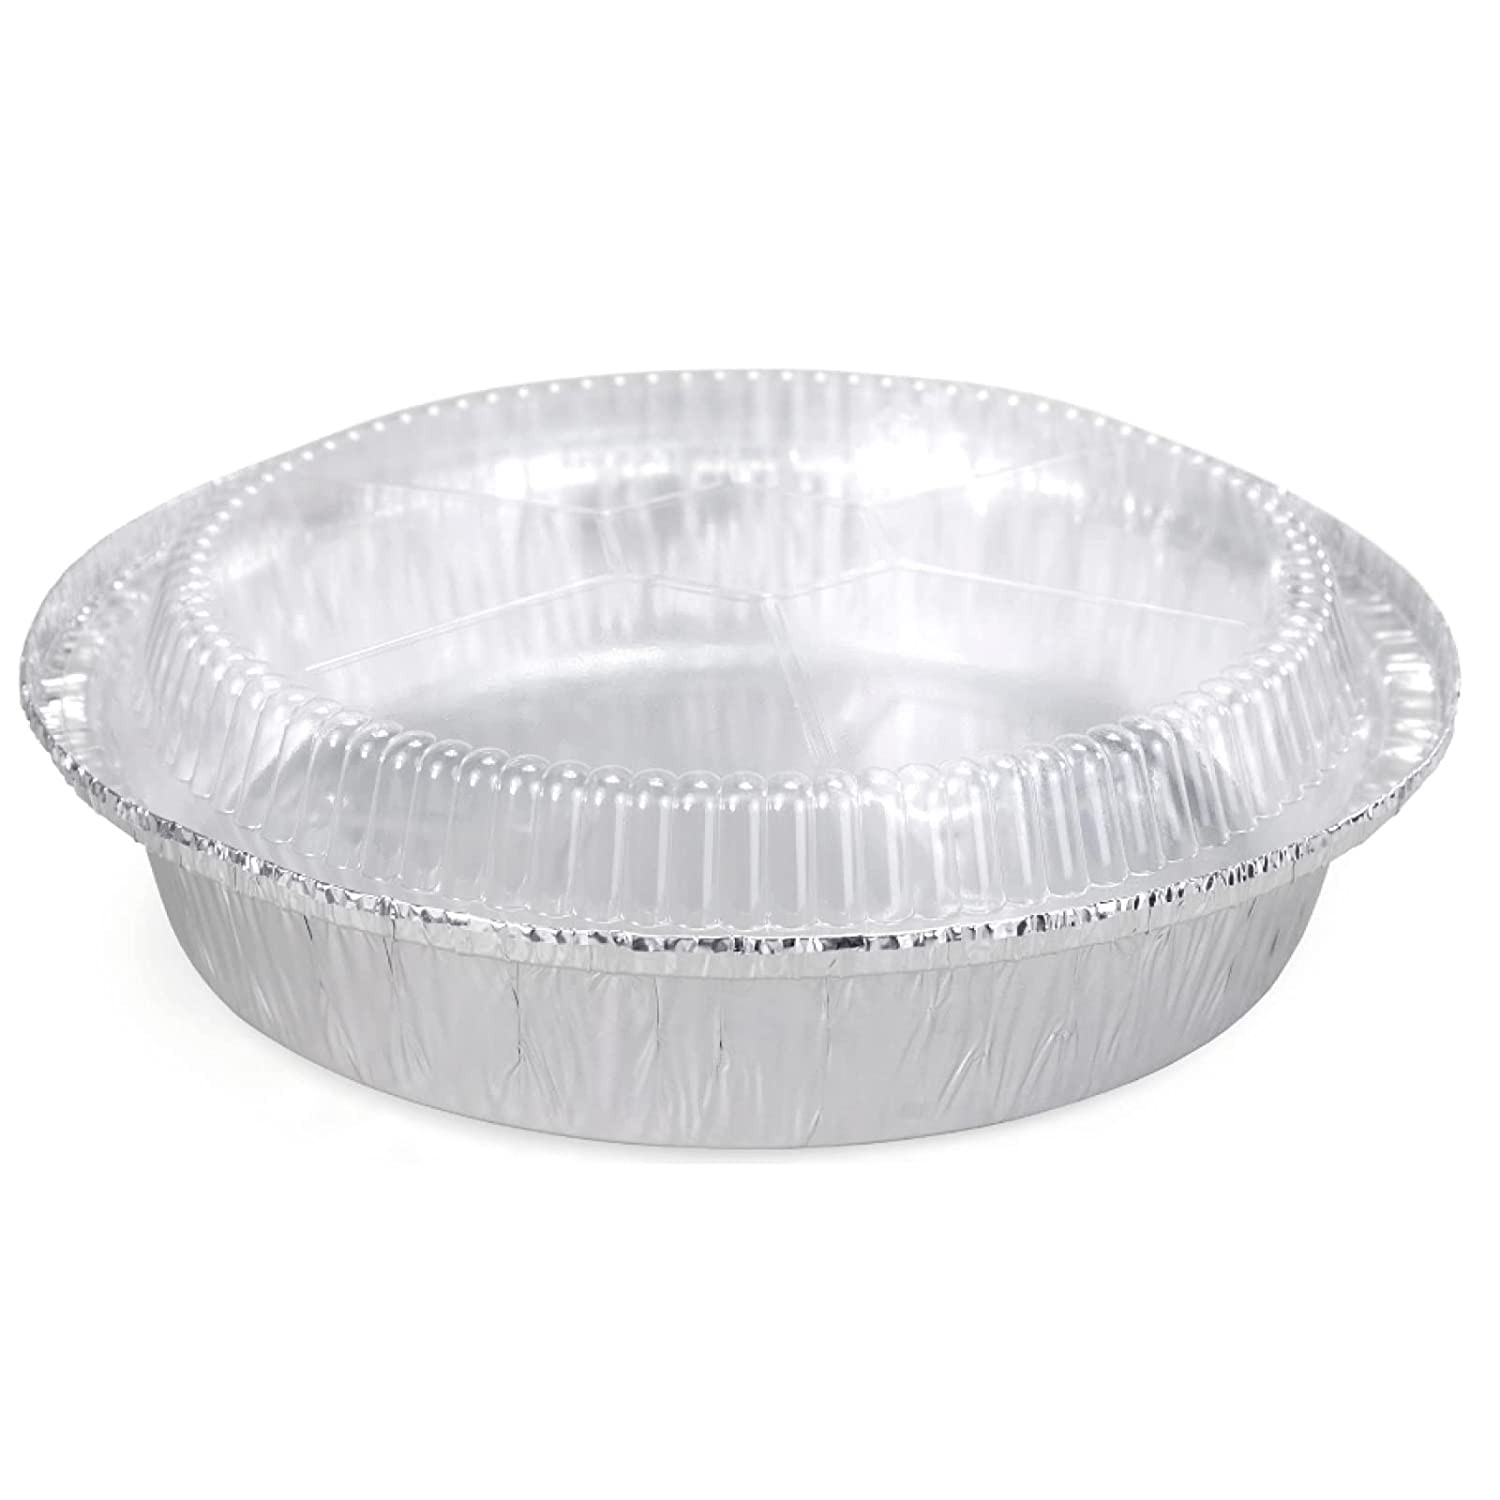 https://idlpack.com/image/cache/catalog/Products/Foil%20Pans%20and%20Trays/51LJaN73+gS._SL1500_-1500x1500.jpg